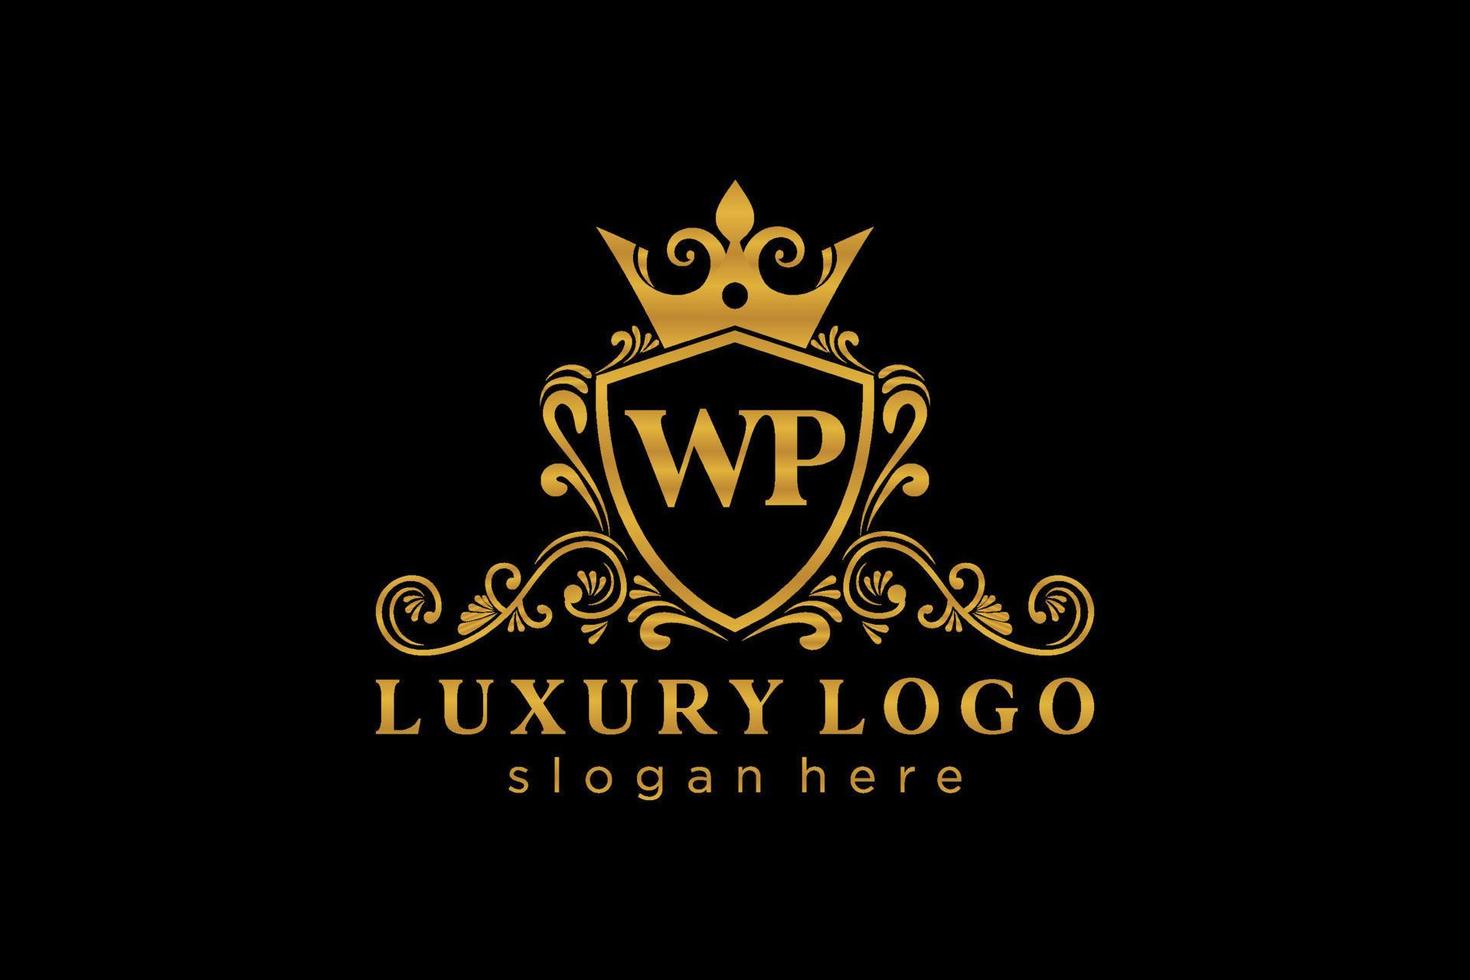 Initial WP Letter Royal Luxury Logo template in vector art for Restaurant, Royalty, Boutique, Cafe, Hotel, Heraldic, Jewelry, Fashion and other vector illustration.